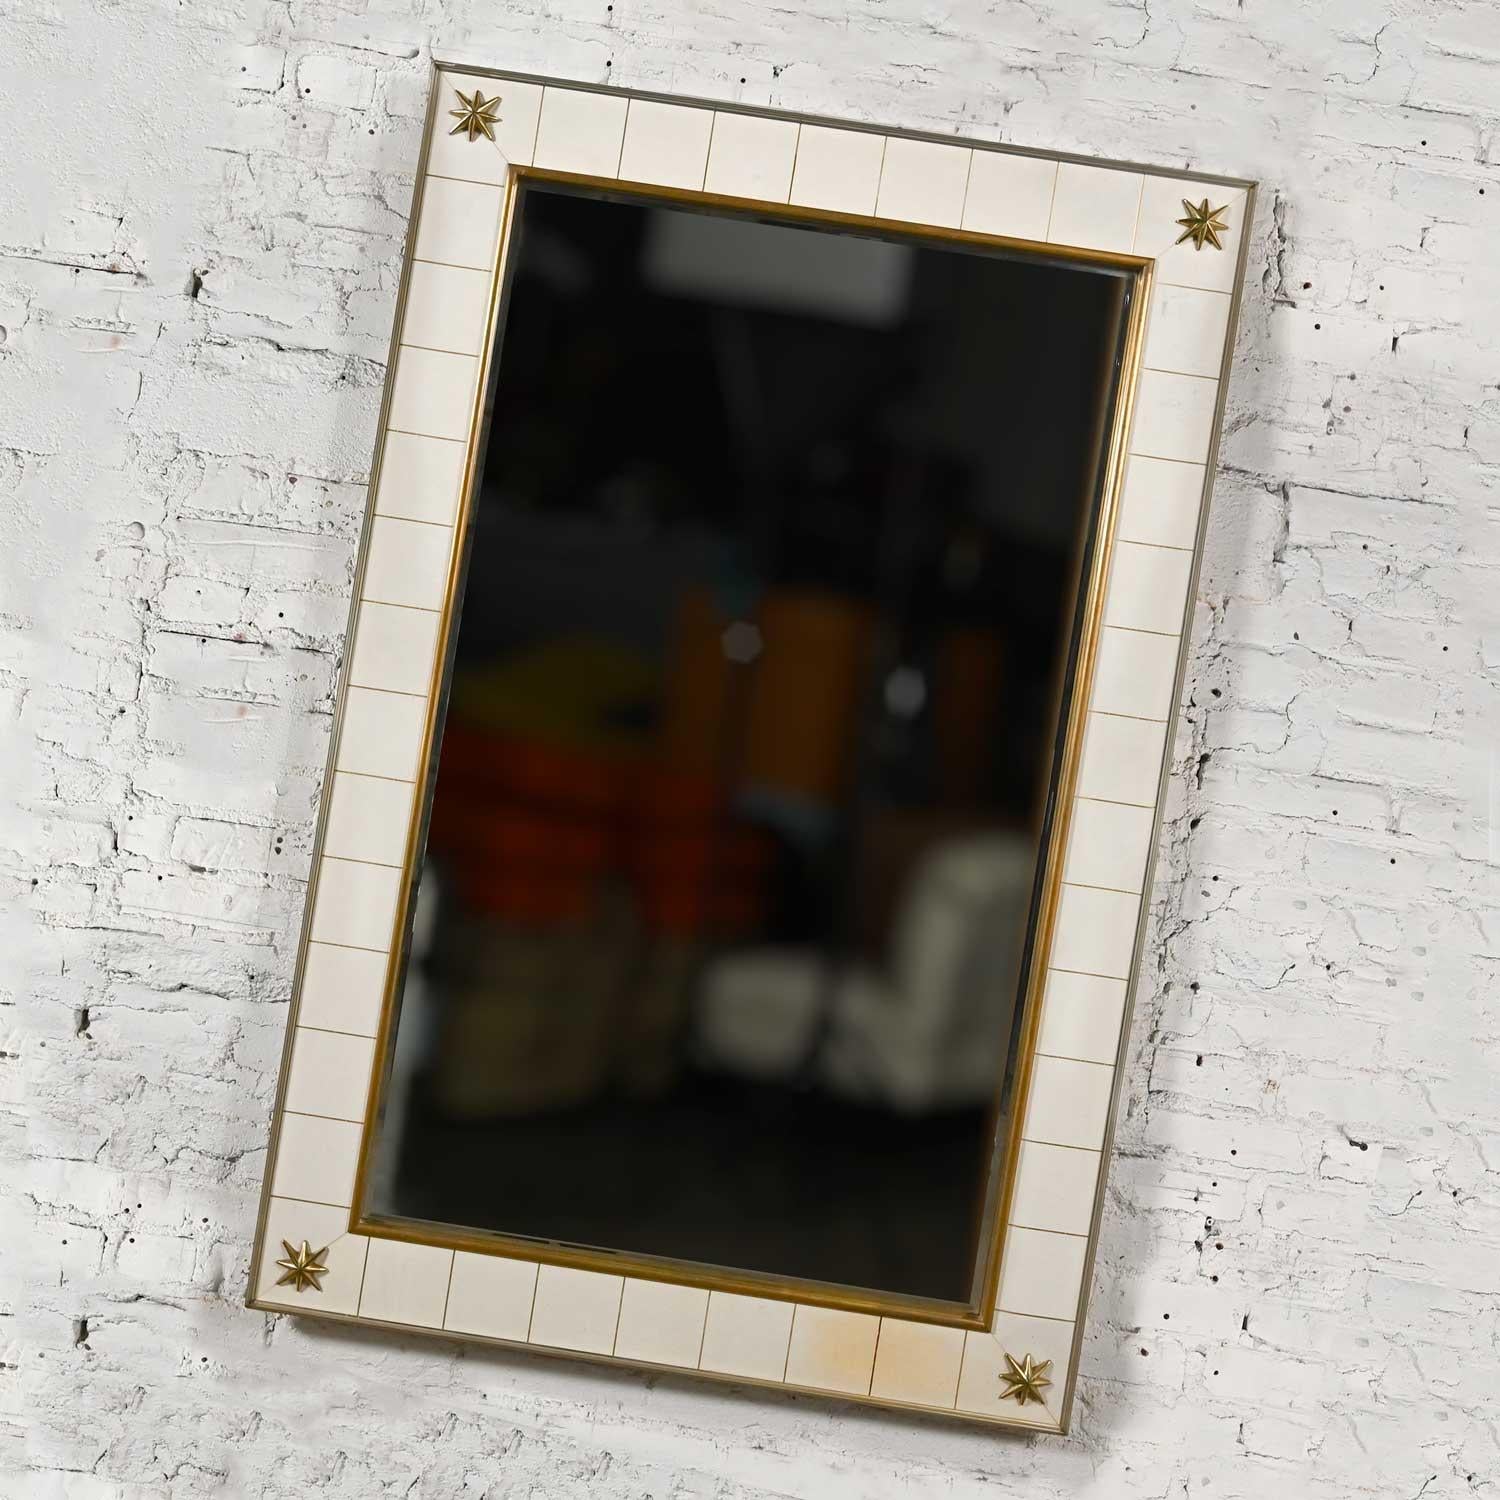 Awesome vintage Hollywood Regency Art Deco large scale white leather mirror by Renzo Rutili for Johnson Furniture. Beautiful condition, keeping in mind that this is vintage and not new so will have signs of use and wear. We have reconditioned the